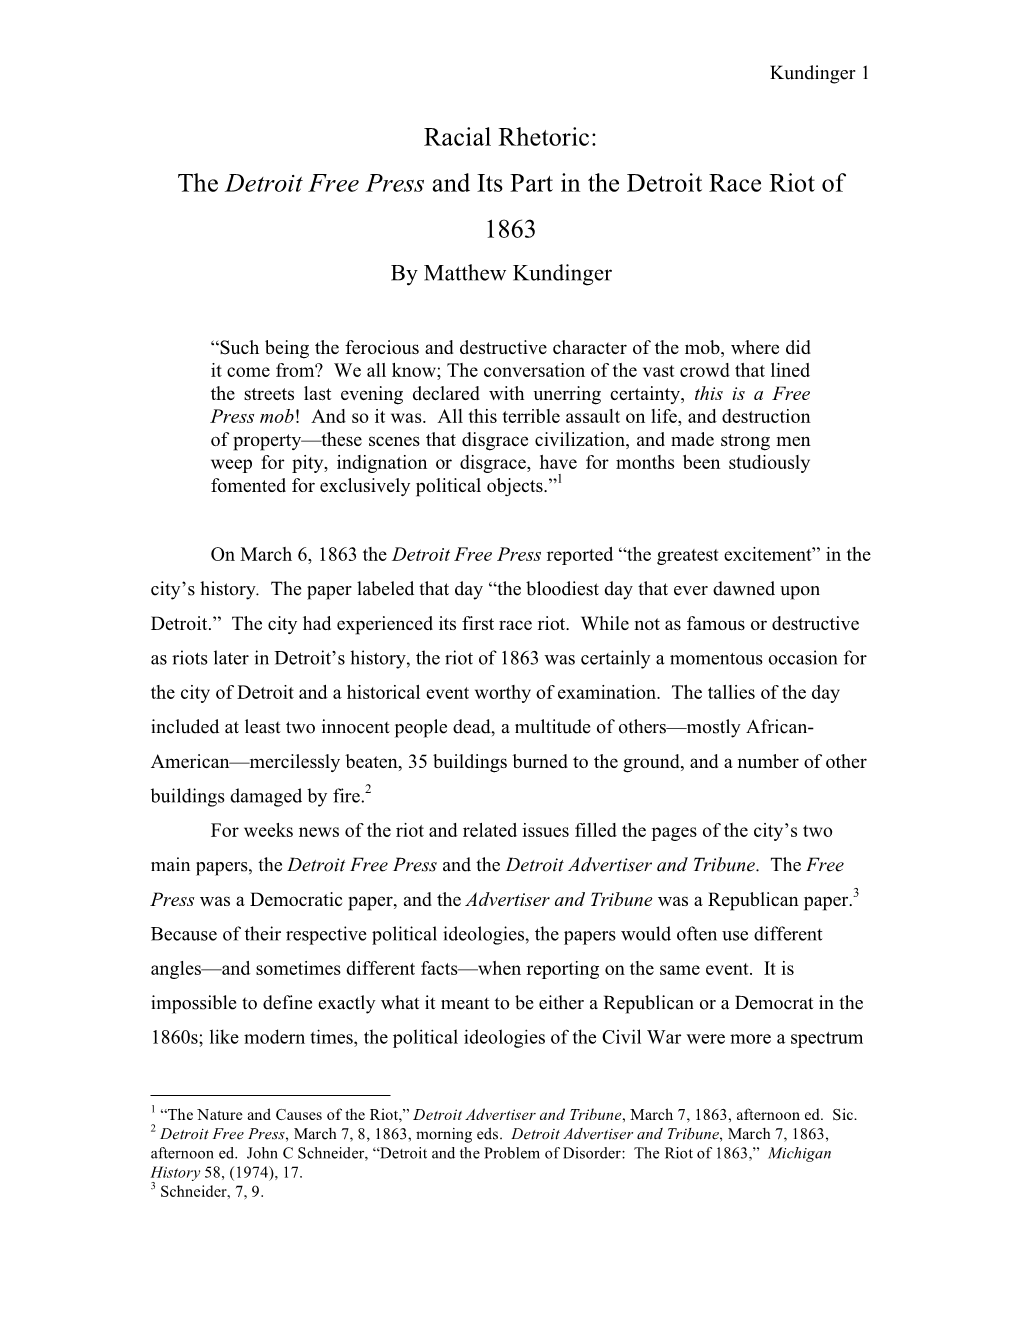 The Detroit Free Press and Its Part in the Detroit Race Riot of 1863 by Matthew Kundinger